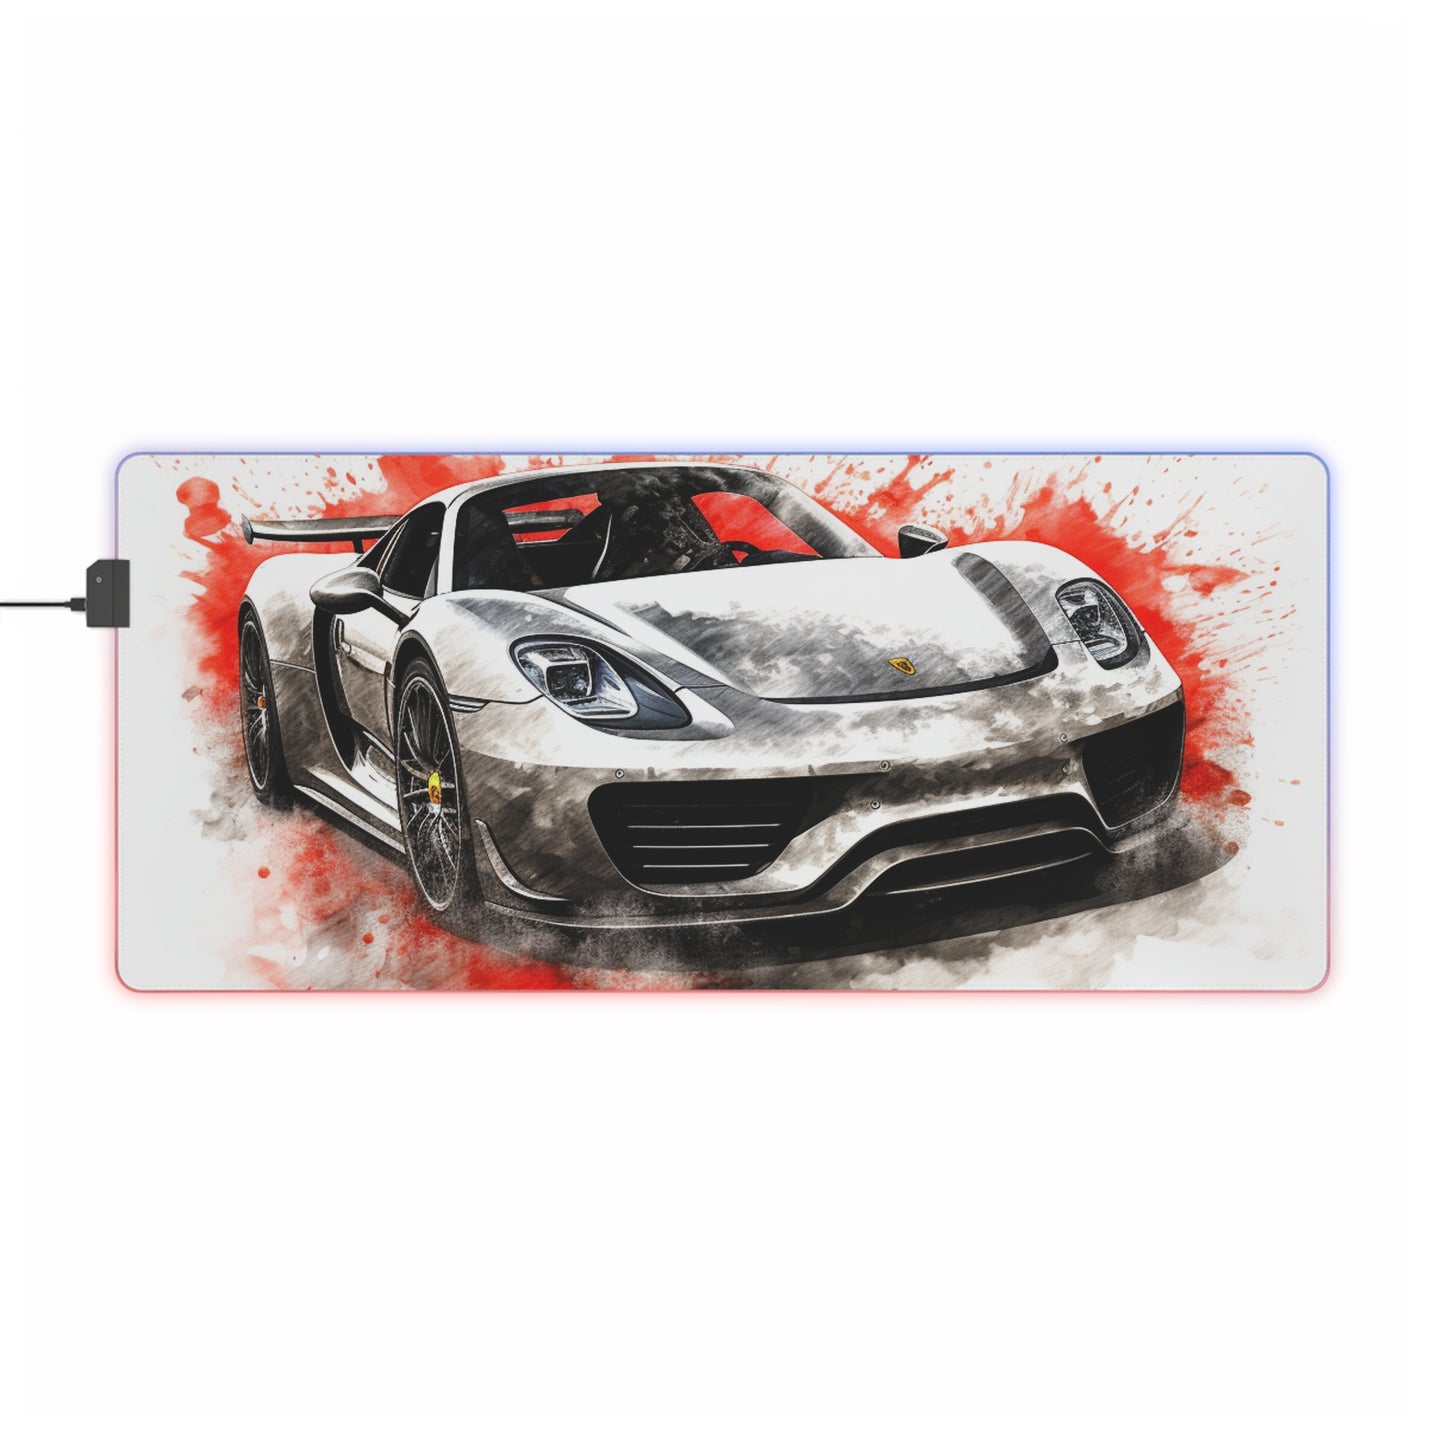 LED Gaming Mouse Pad 918 Spyder white background driving fast with water splashing 4